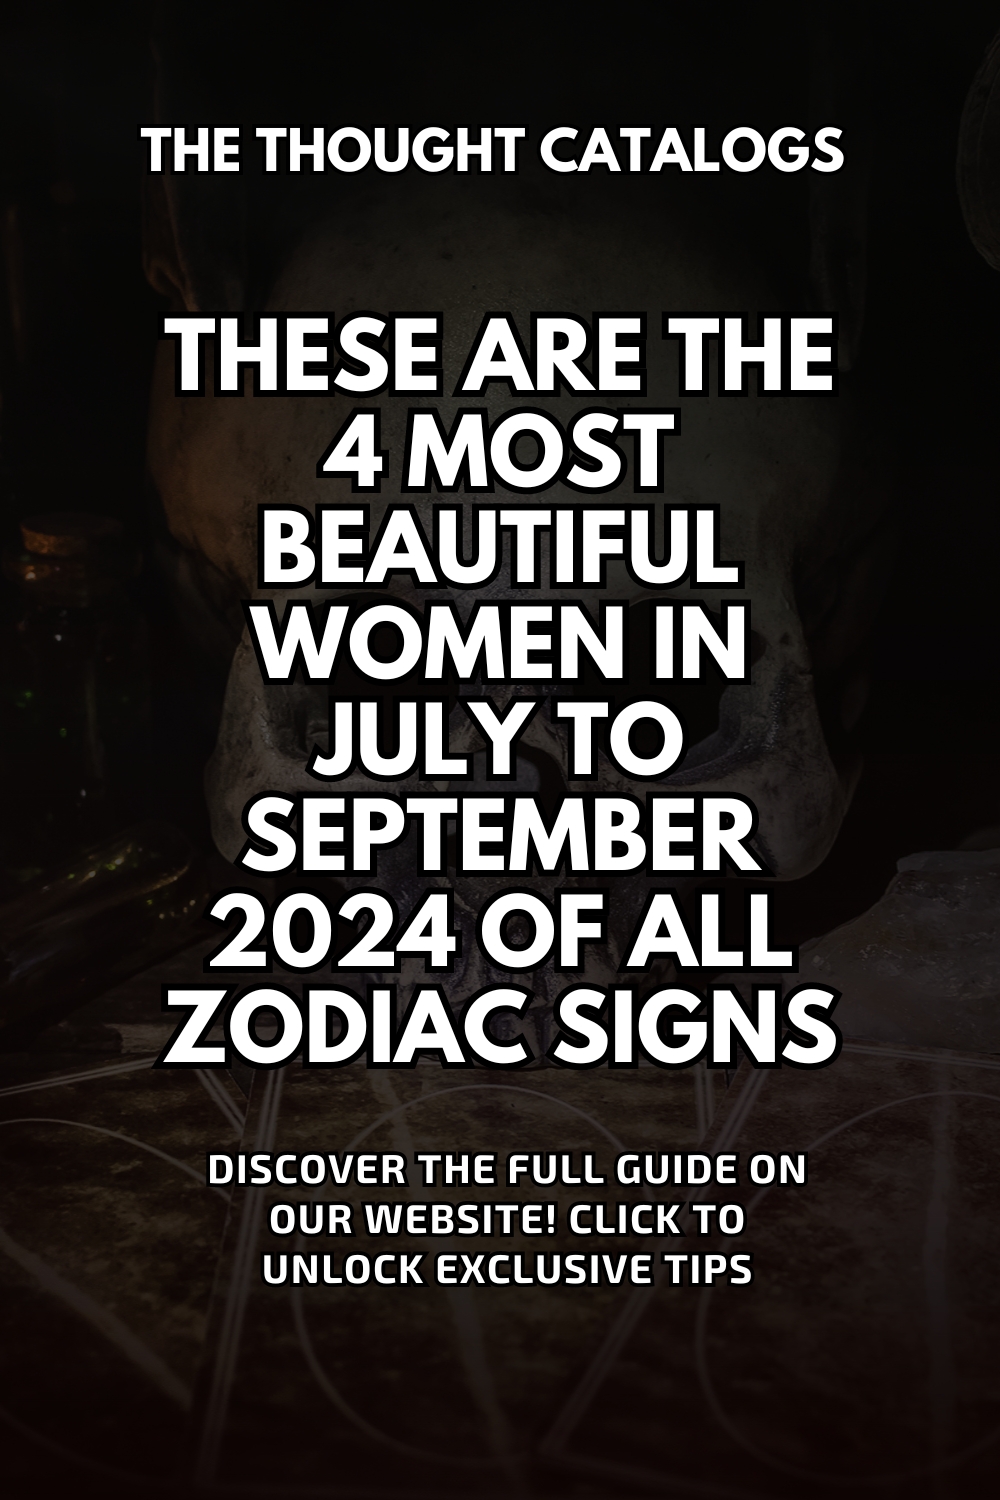 These Are The 4 Most Beautiful Women In July To September 2024 Of All Zodiac Signs